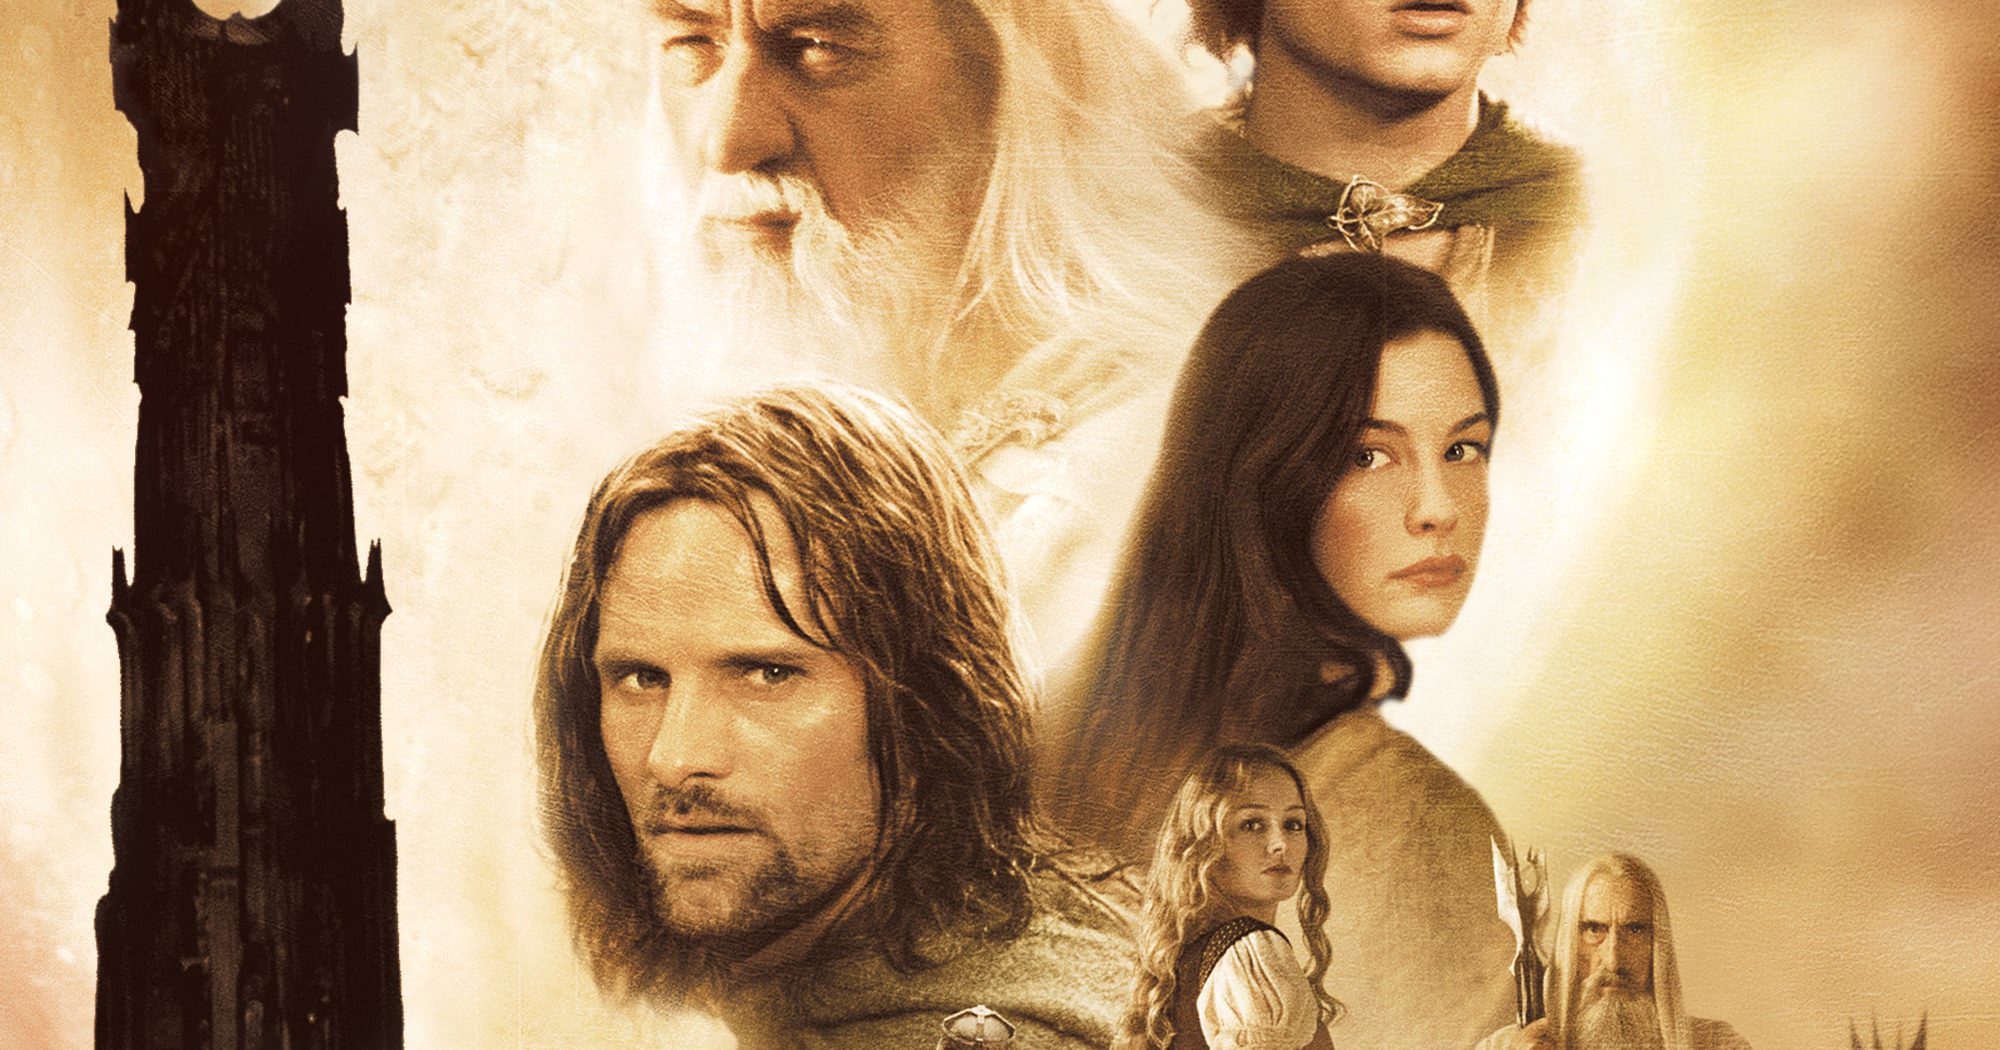 Poster for the movie "The Lord of the Rings: The Two Towers"